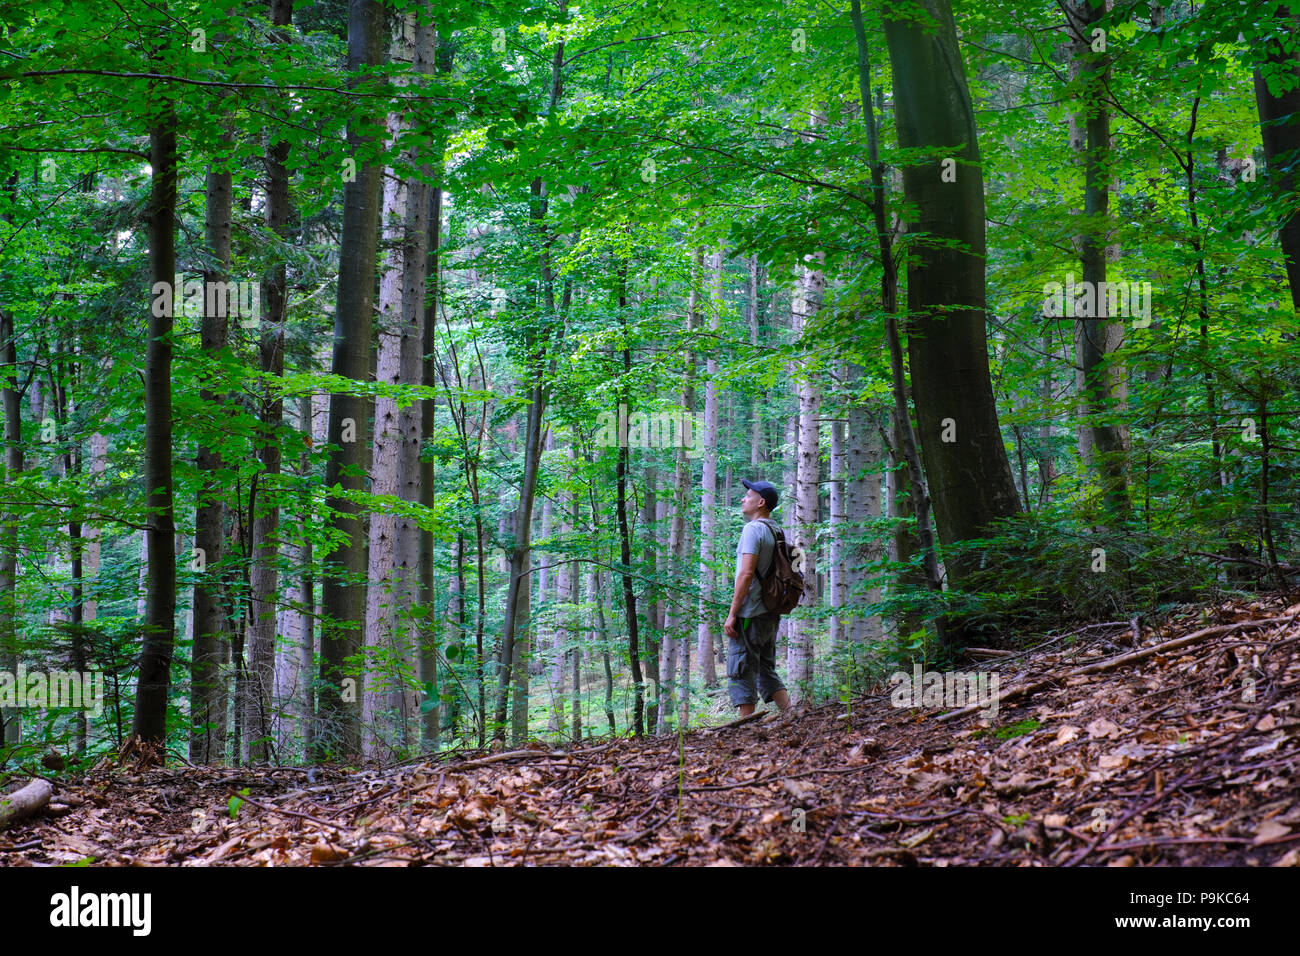 Alone man in wild forest Stock Photo